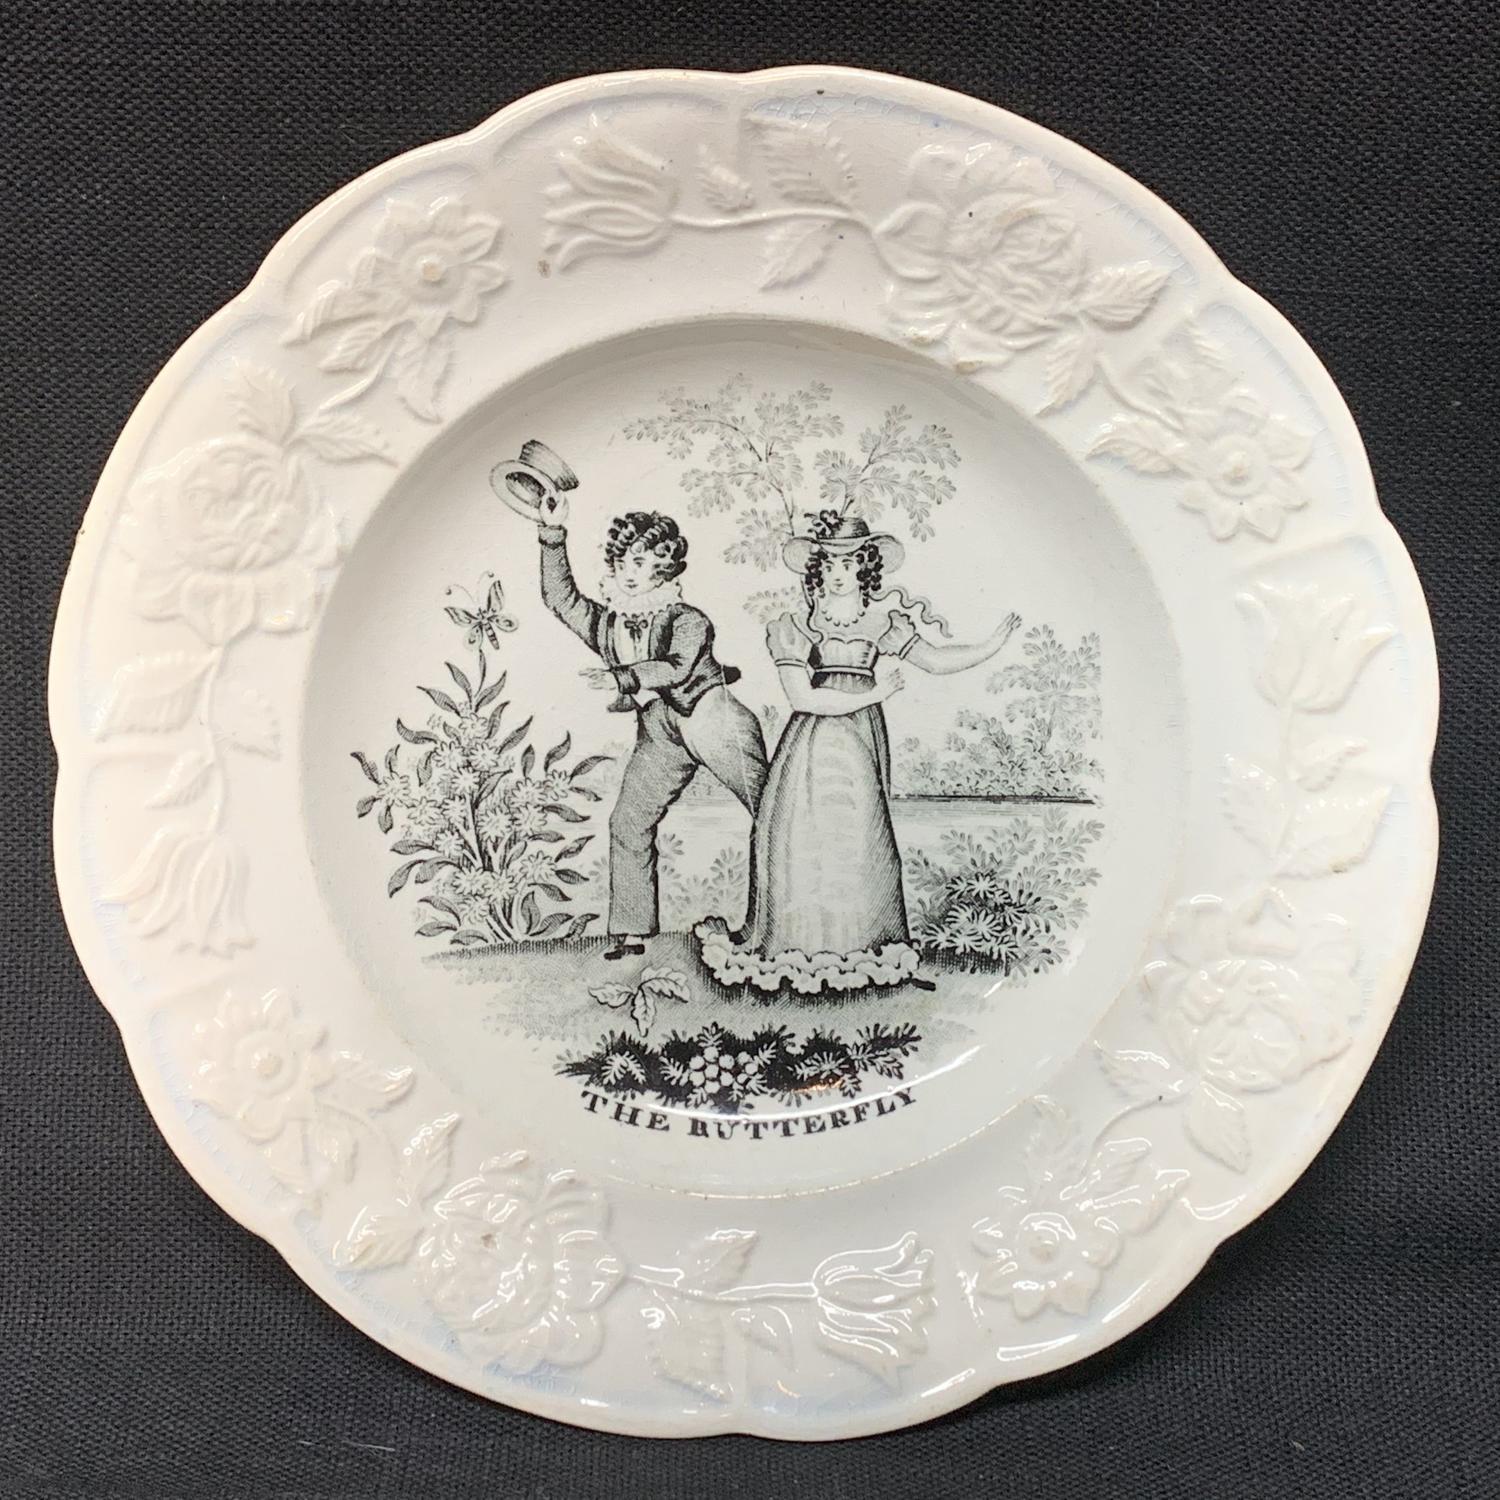 Early Child’s Pearlware Transfer Printed Plate THE BUTTERFLY 1840